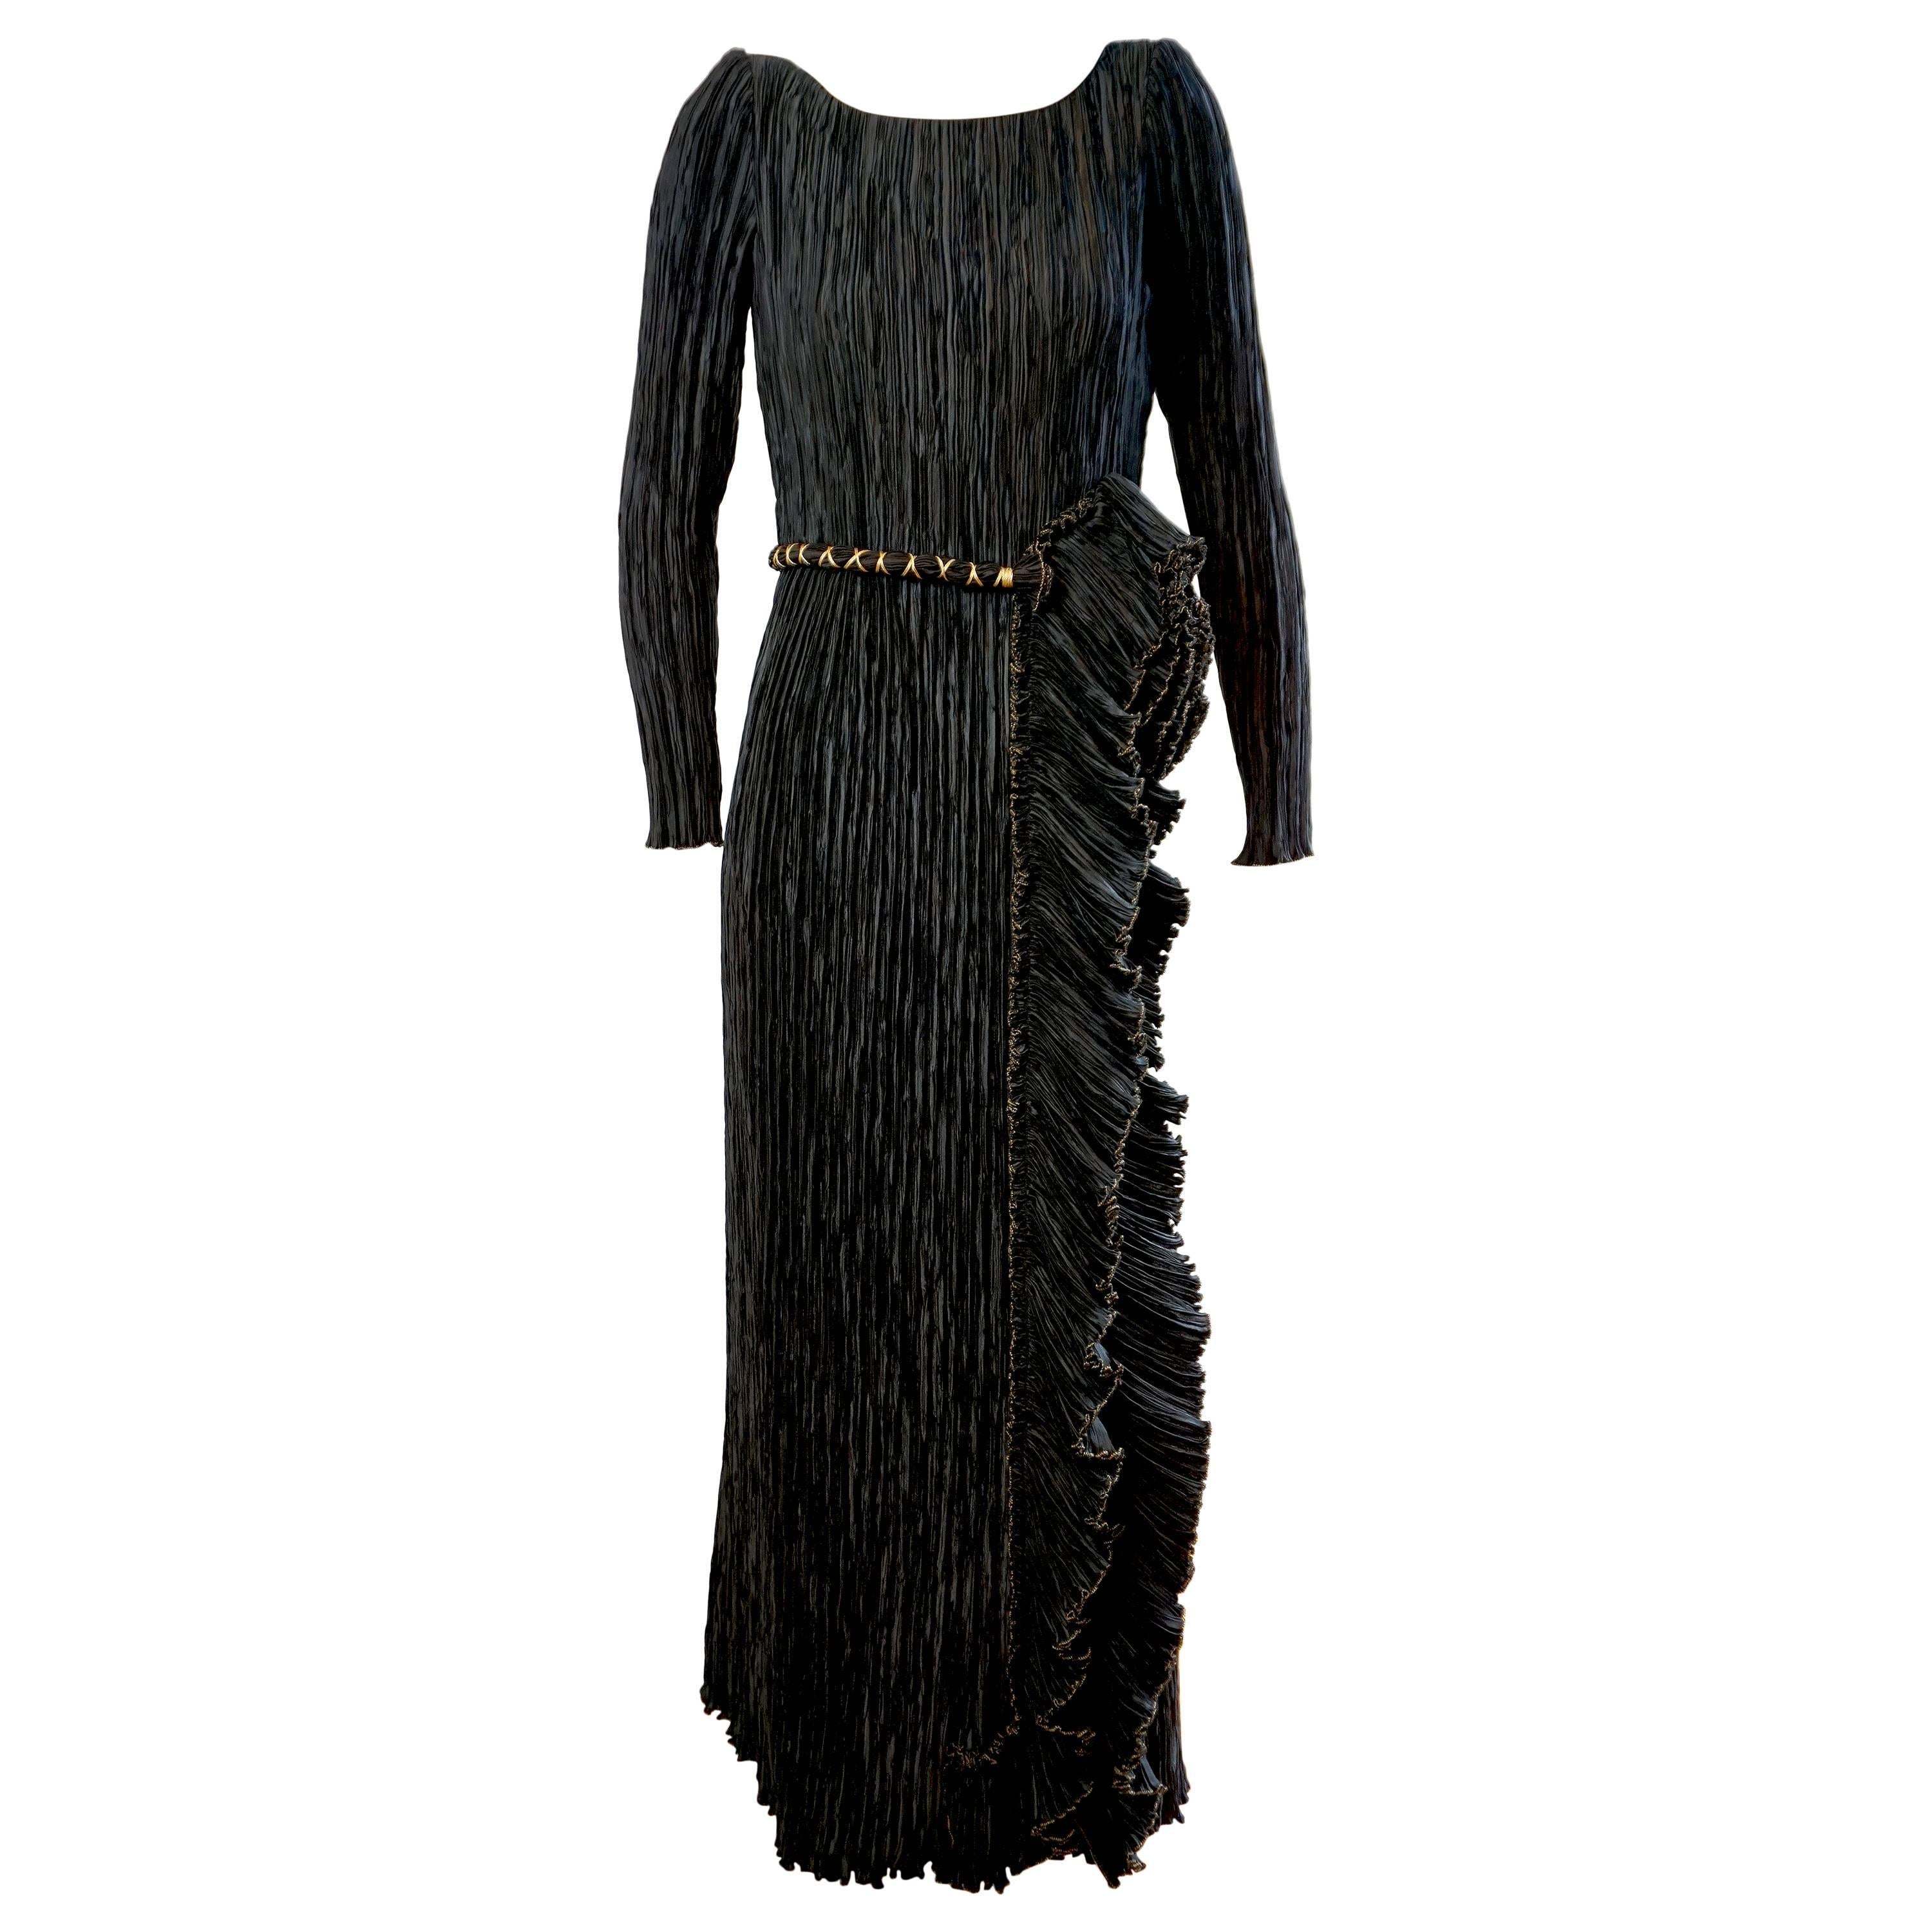 MARY MCFADDEN Black & Gold Pleated Ruffle Gown